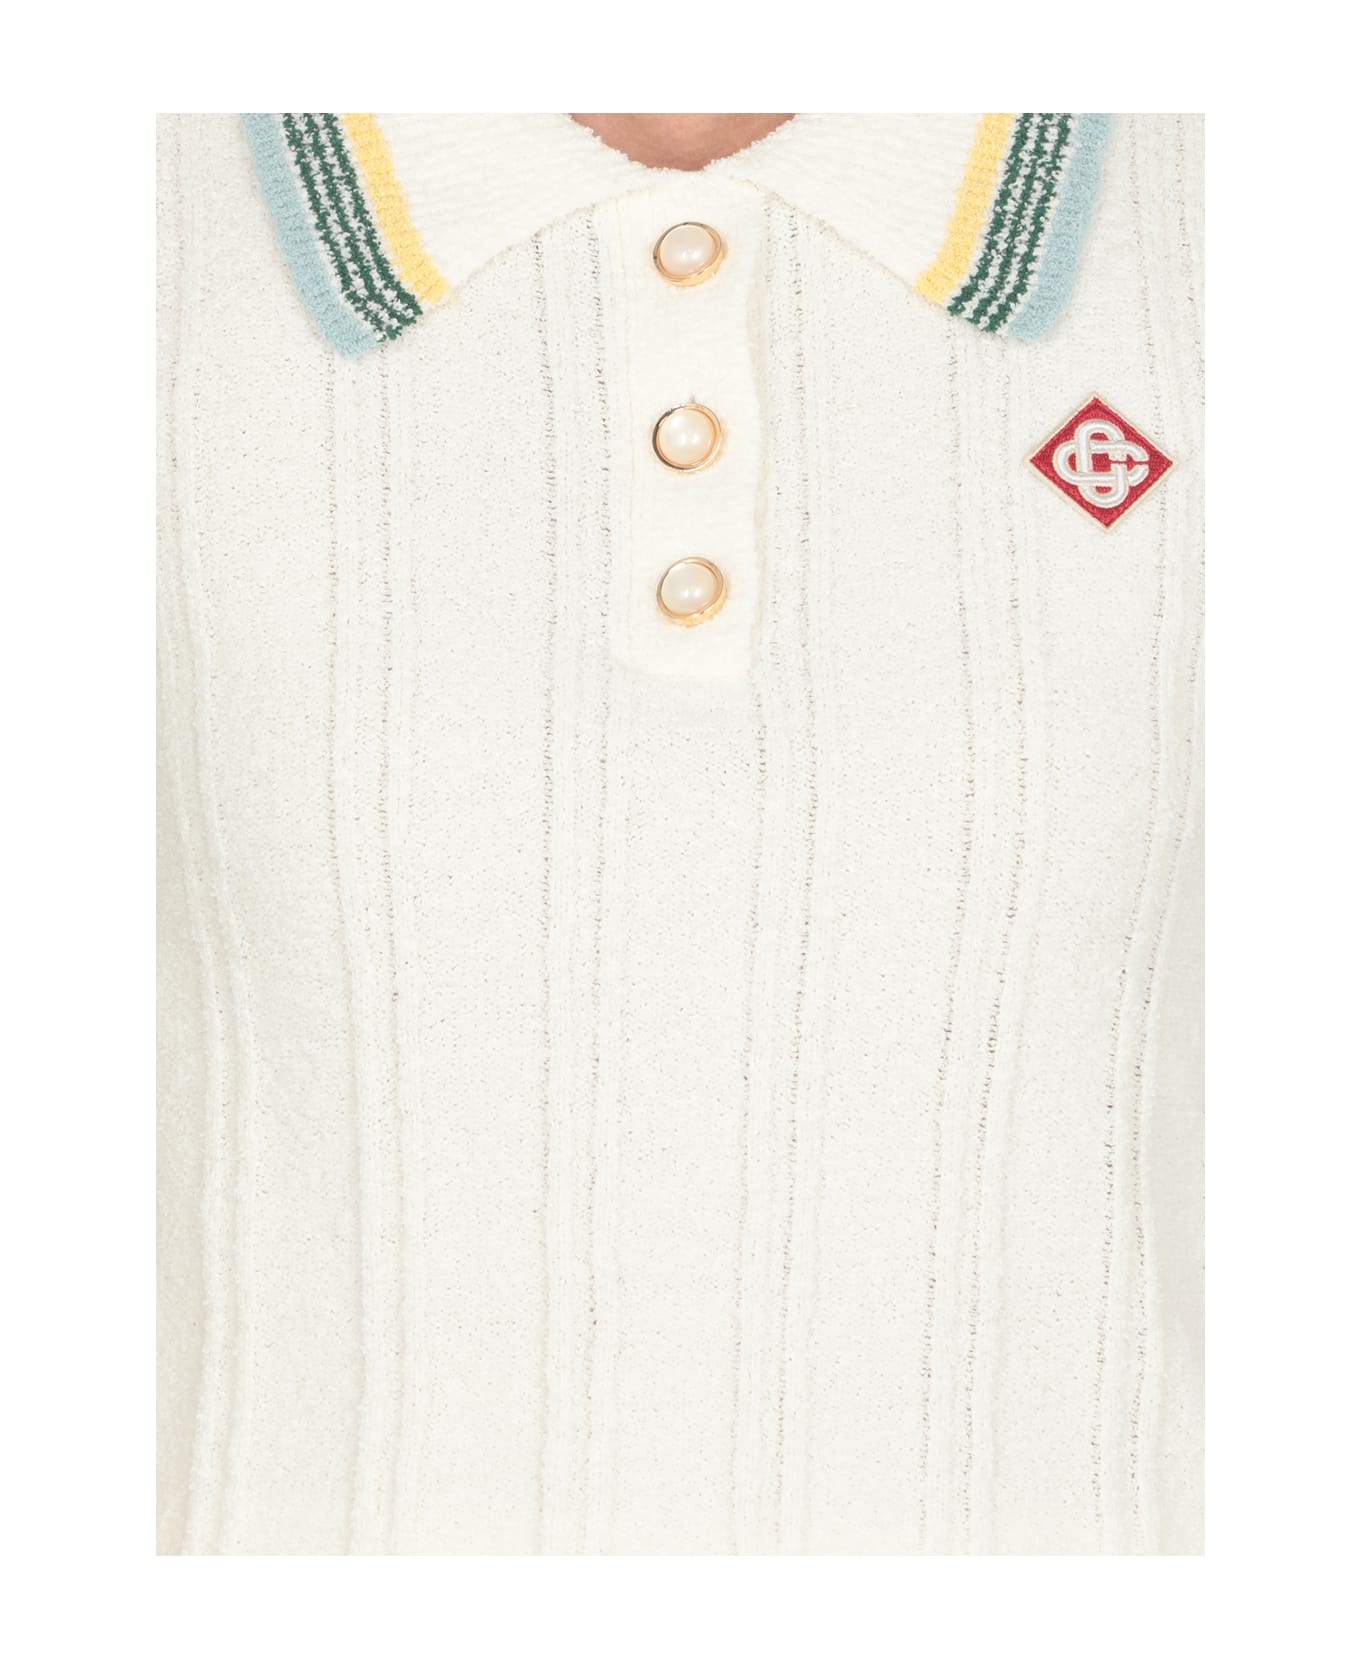 Casablanca Polo Shirt With Decorative Buttons - Ivory ポロシャツ